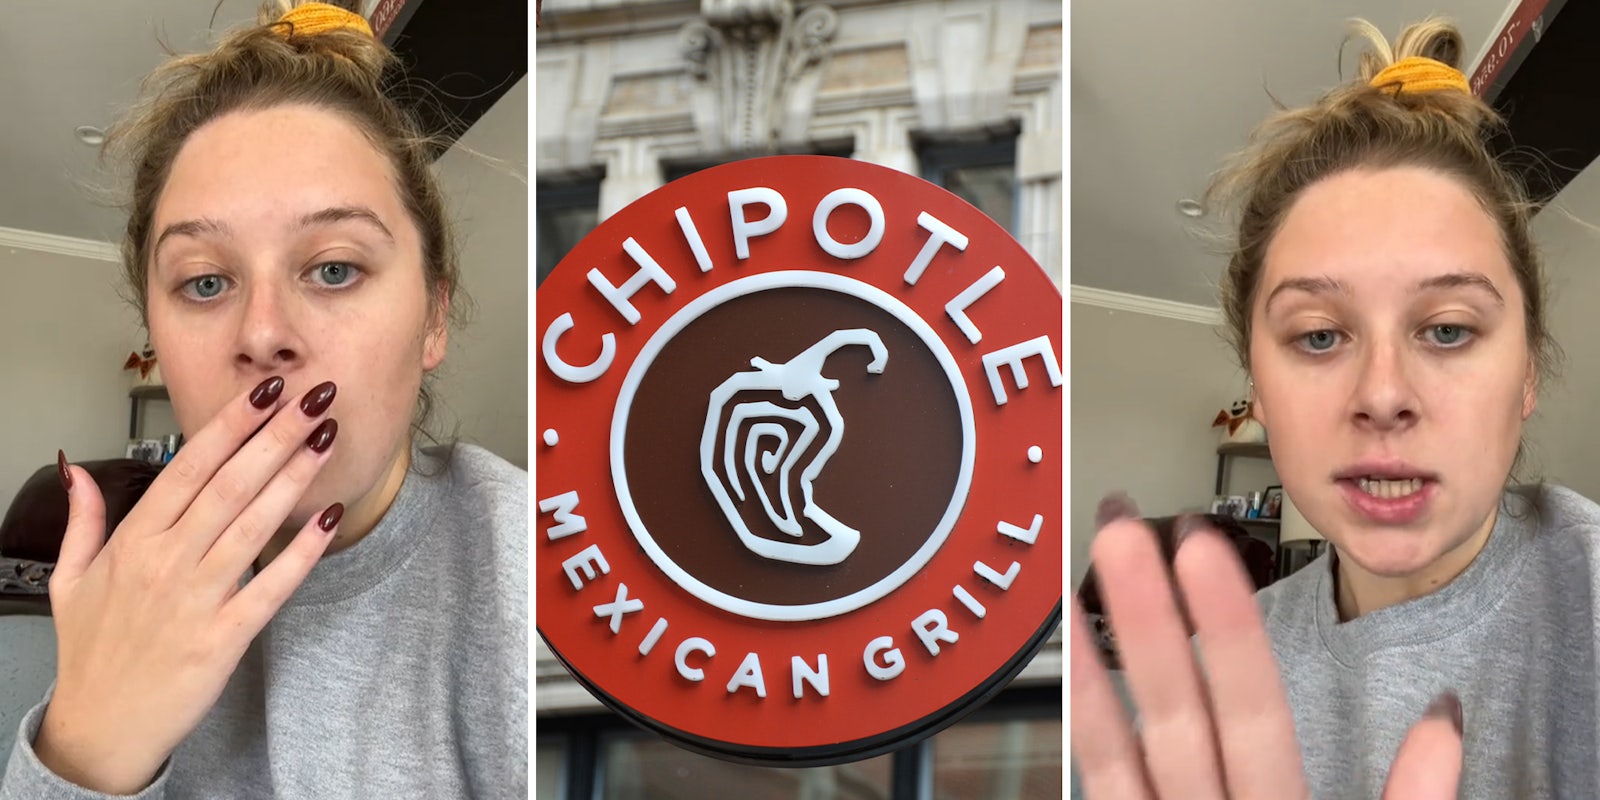 Chipotle customer orders really simple bowl. They still messed it up